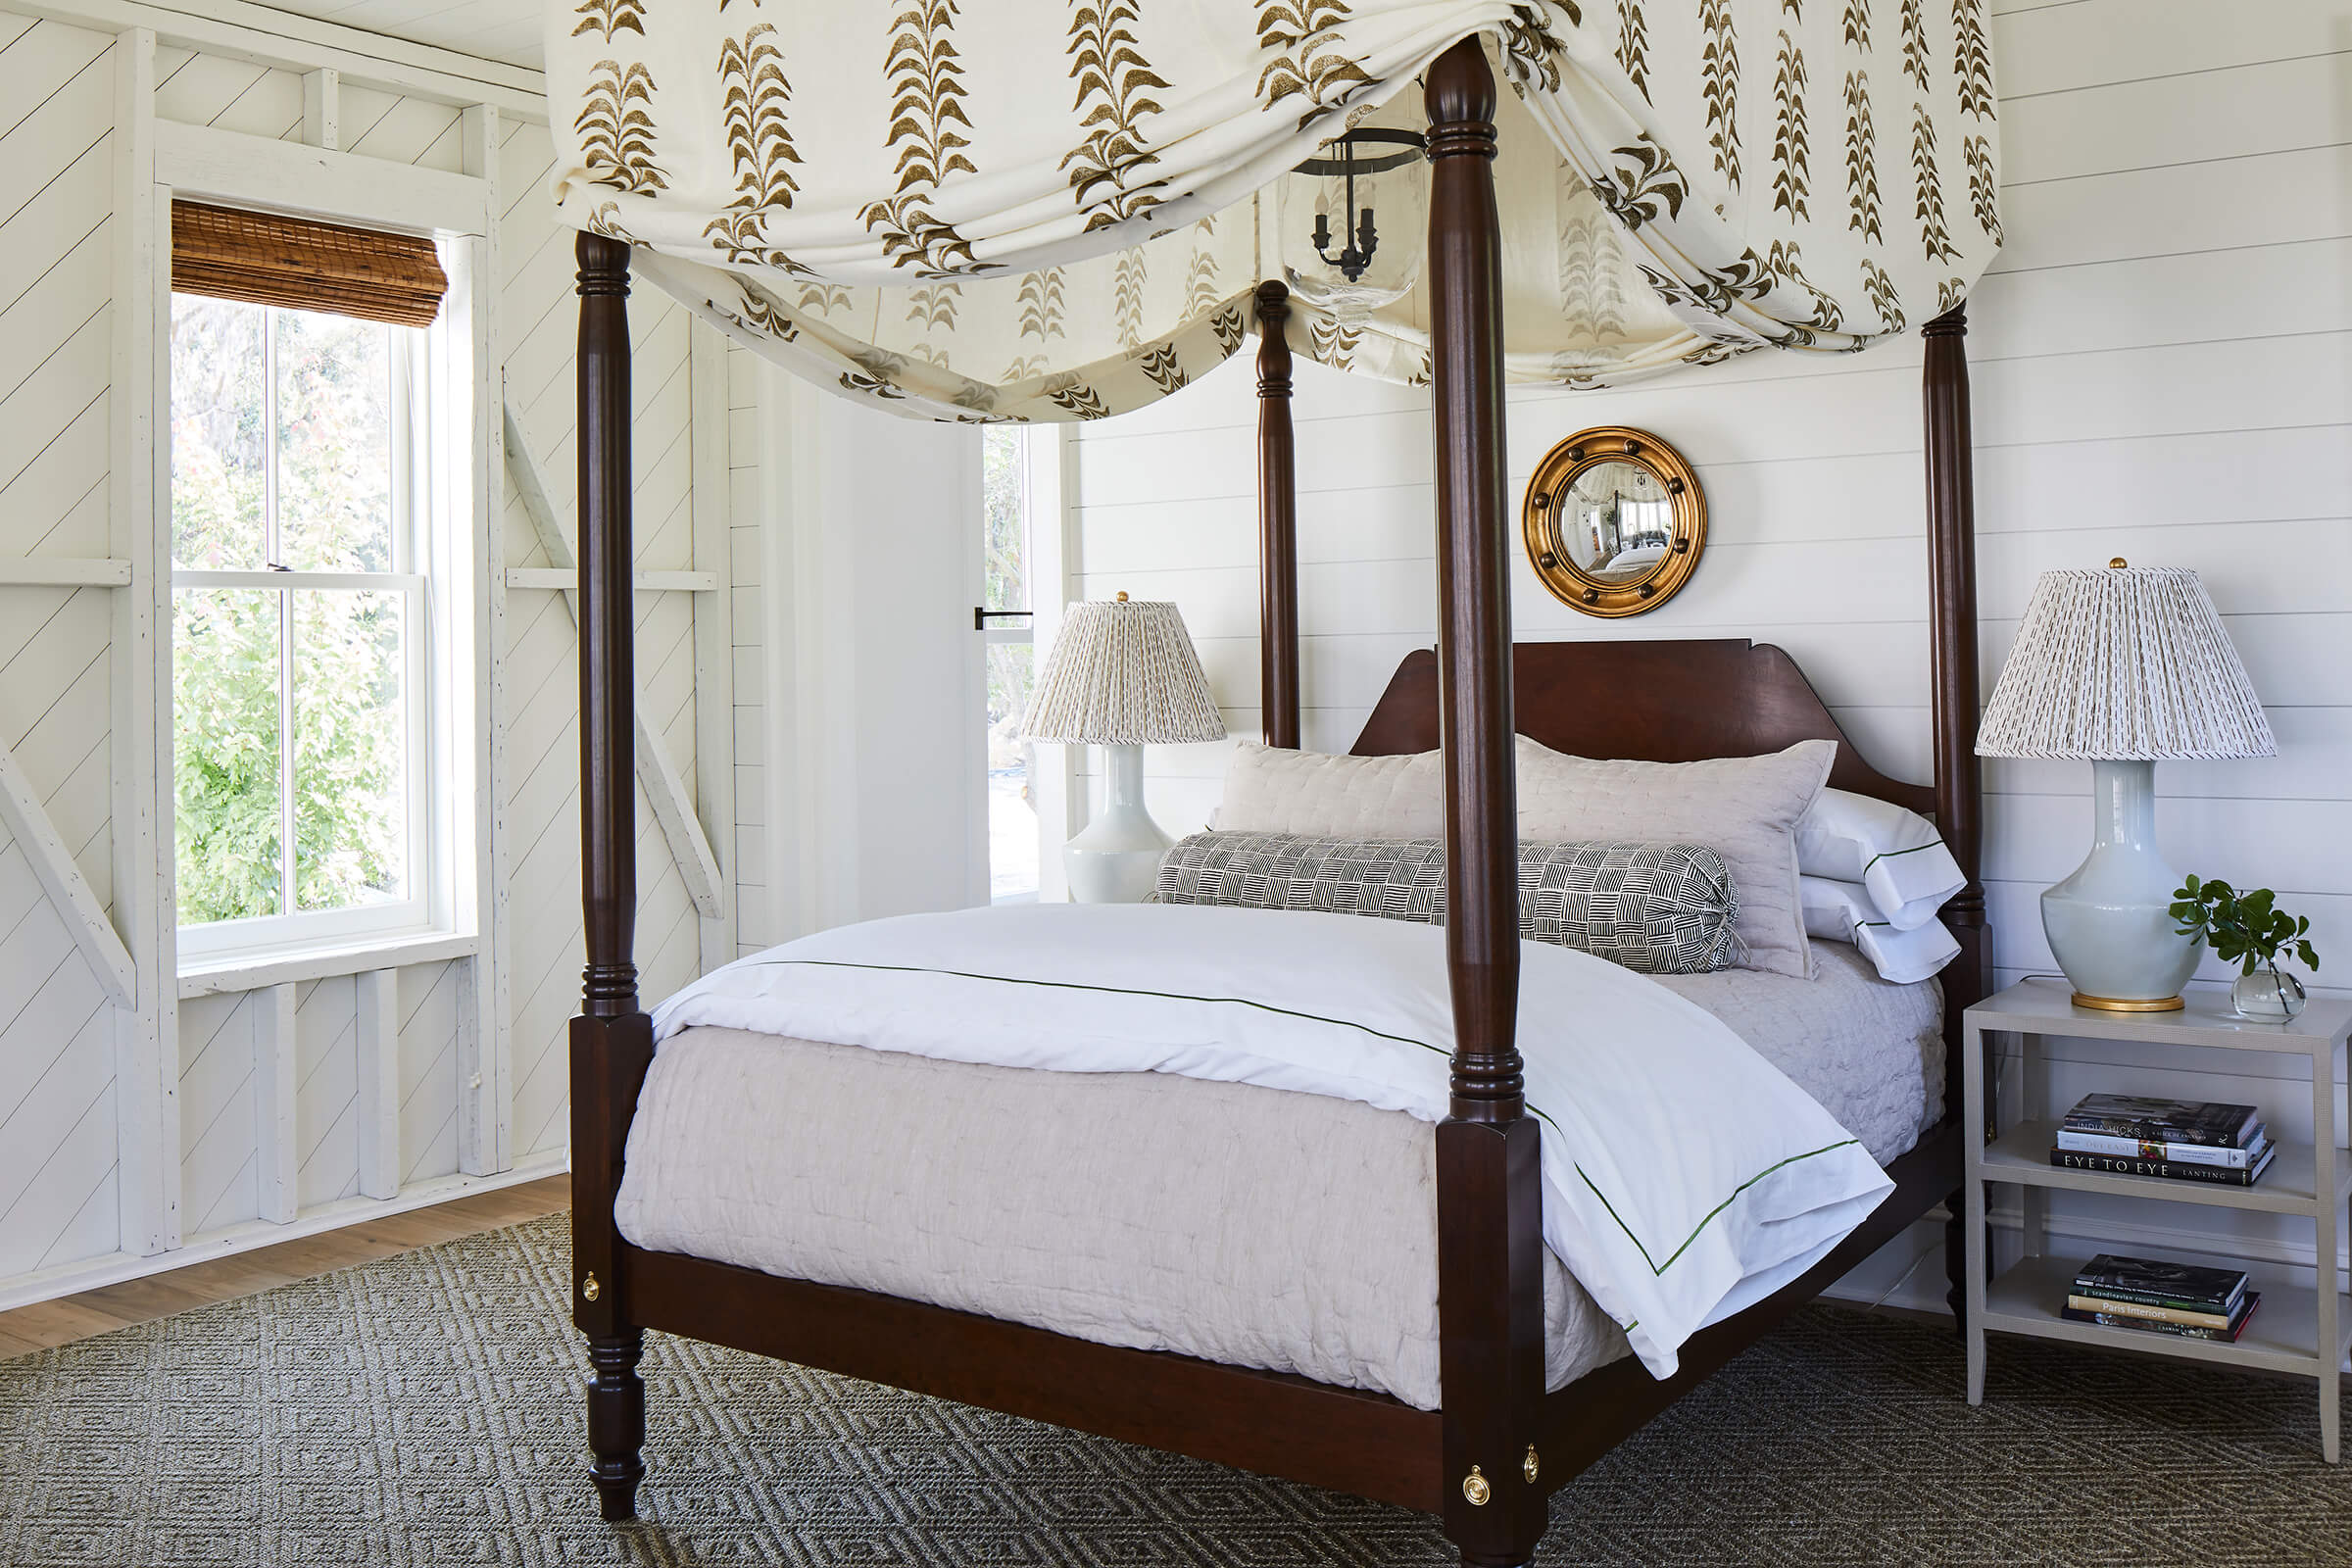 A bedroom featuring a Marvin double hung window in the 2019 Southern Living Showhouse on Amelia Island.